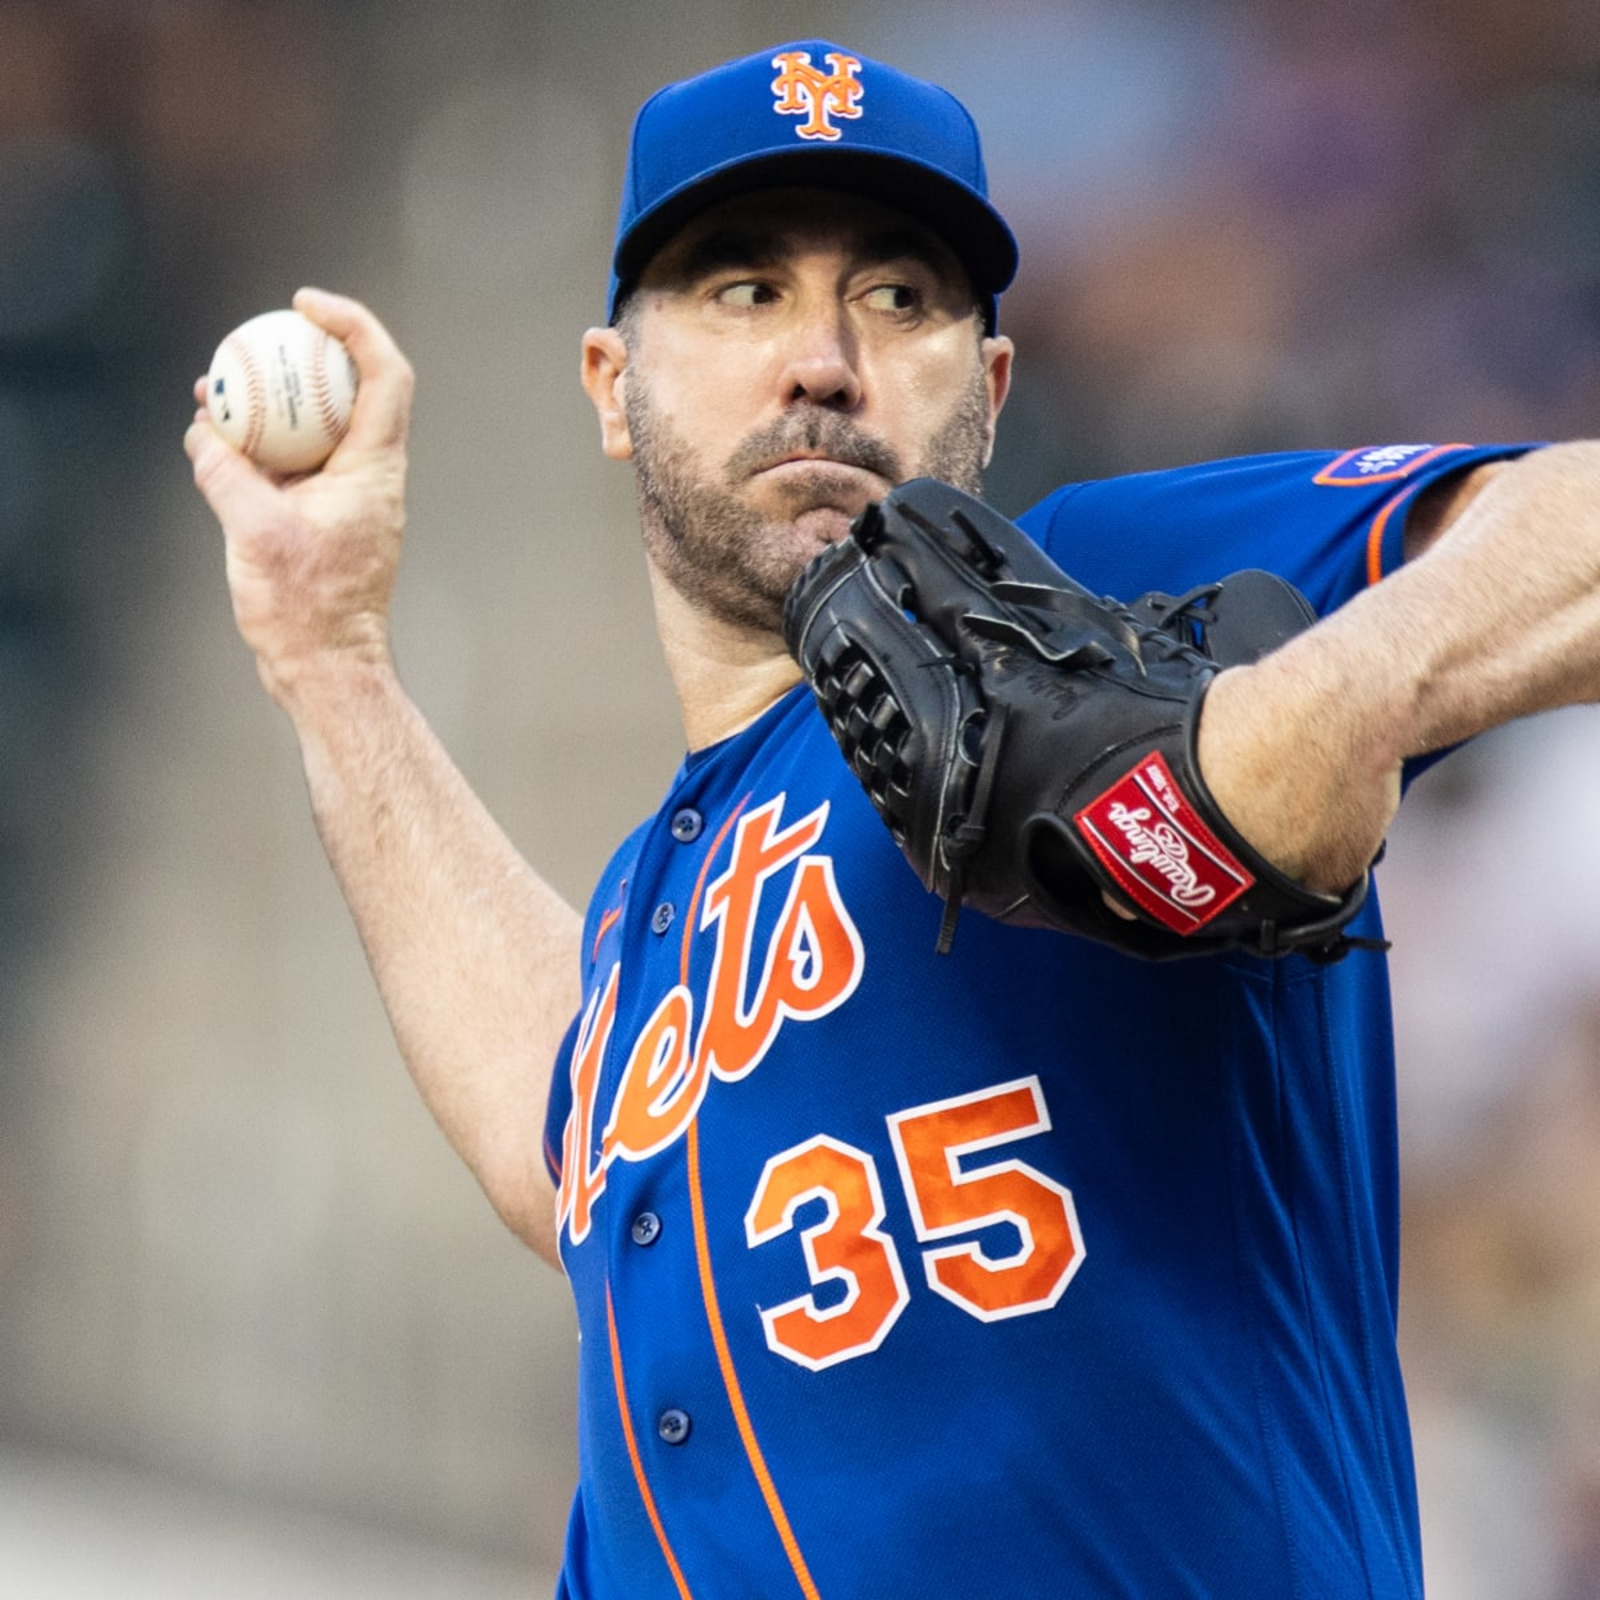 Justin Verlander admits he has 'some work to do' after rough Mets